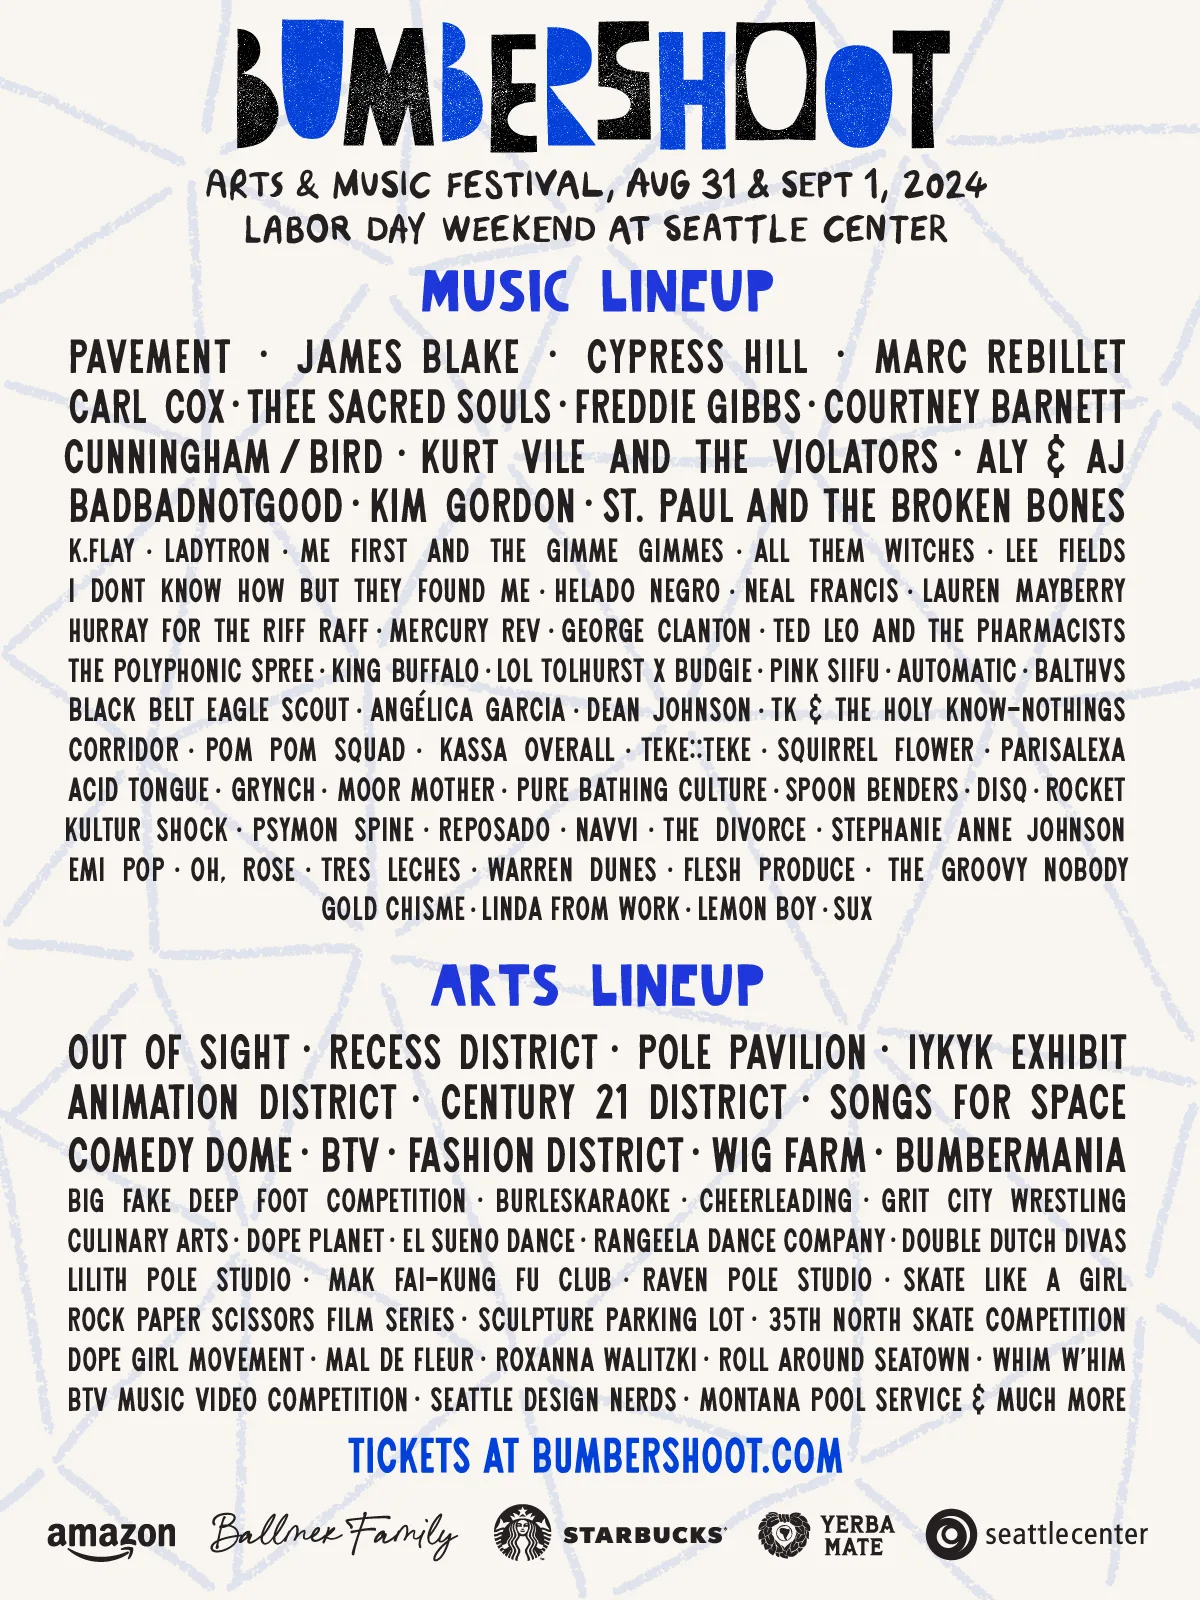 The full music lineup and arts lineup for the Bumbershoot Arts + Music Festival at the Seattle Center in Seattle, Washington, in 2024. The music lineup was announced on Tuesday, May 21st.